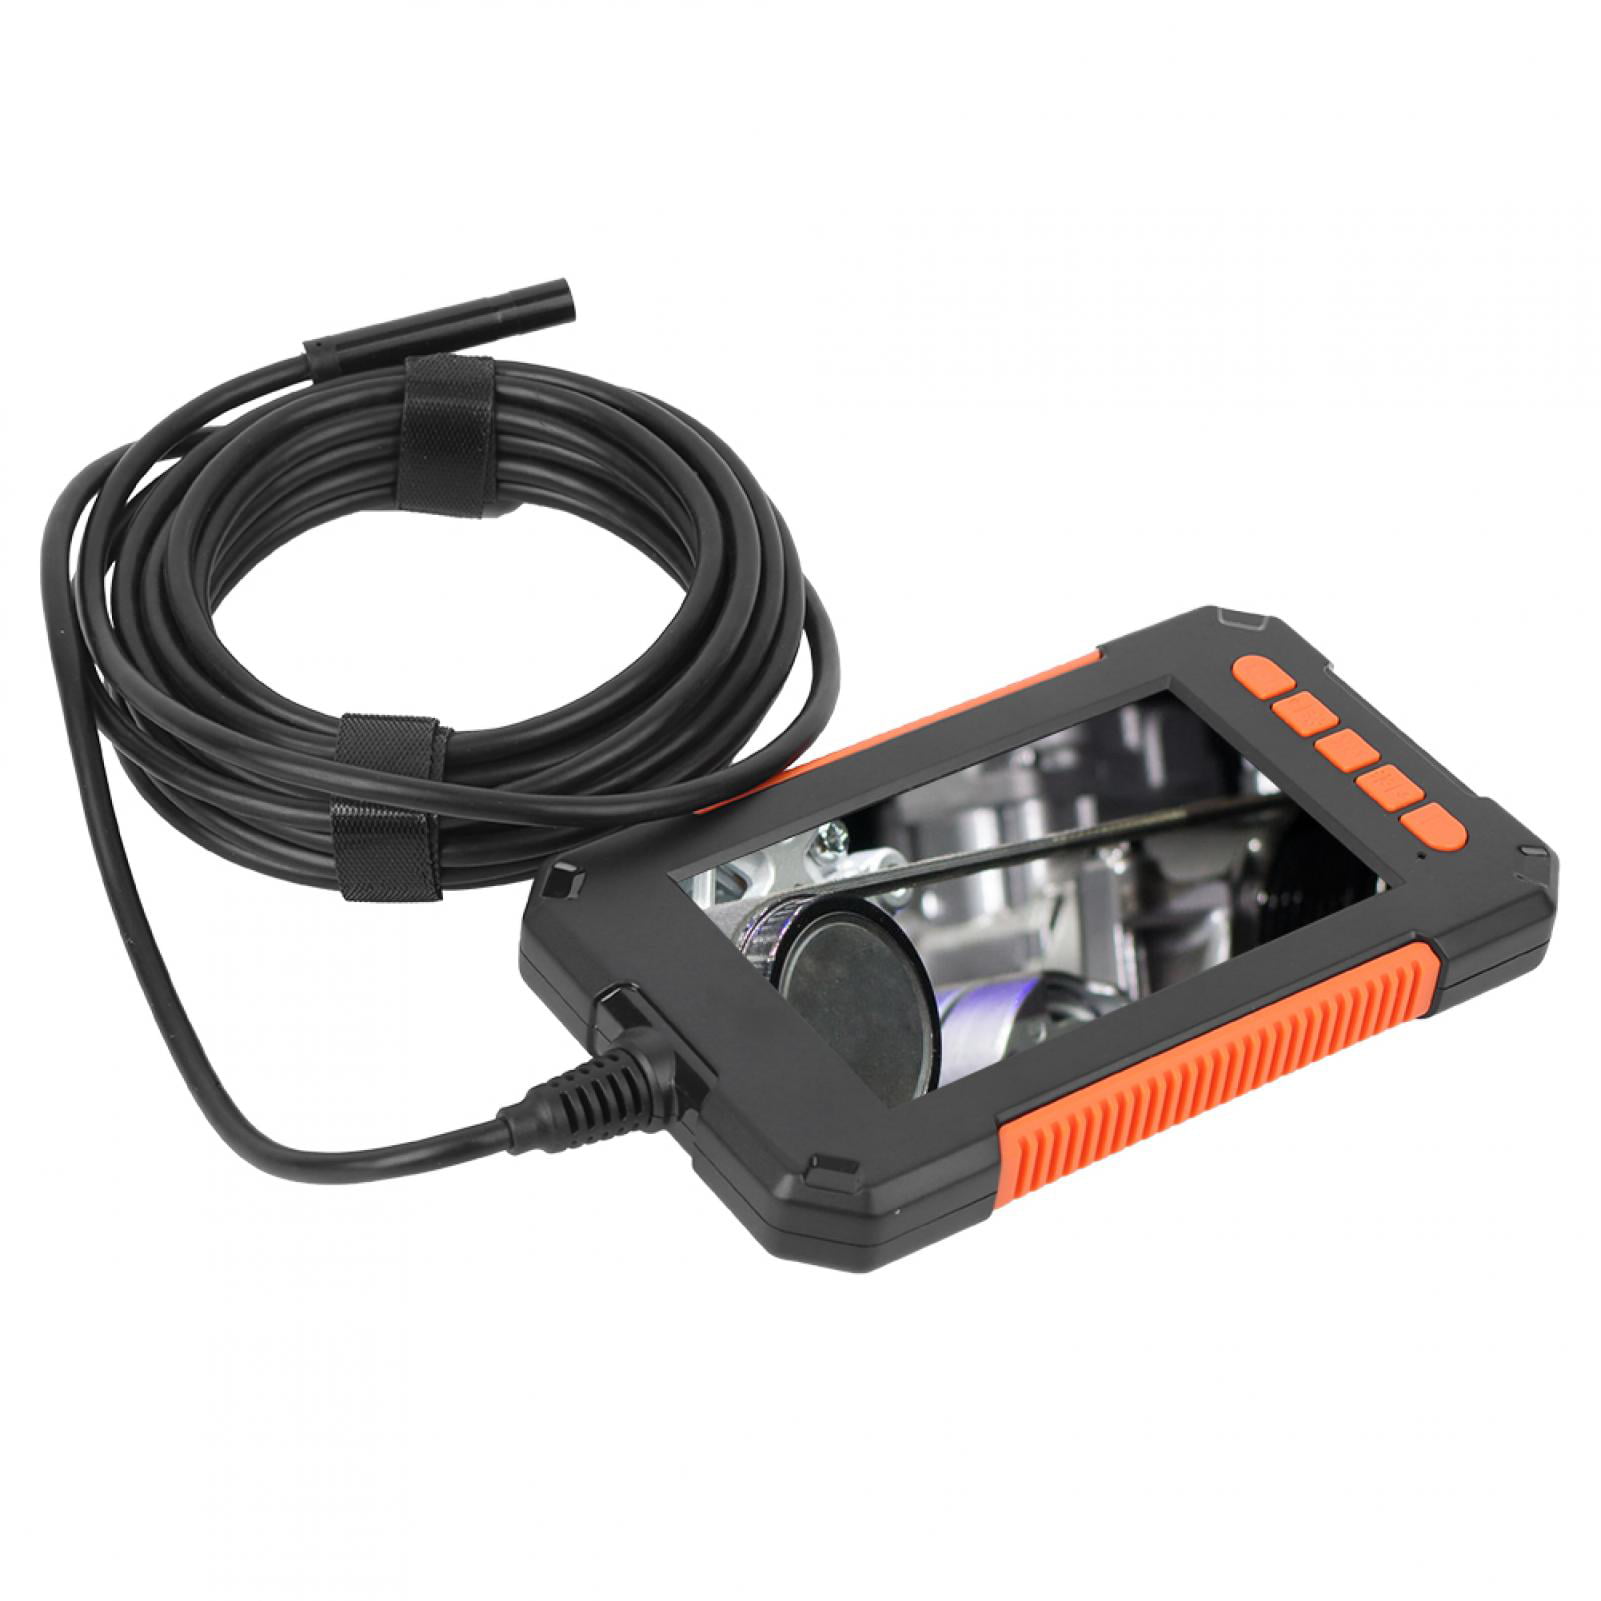 4.3inch Endoscope Portable Endoscope 2600 Mah 4.3Inch Convenient To Use for Quest Underwater Observation